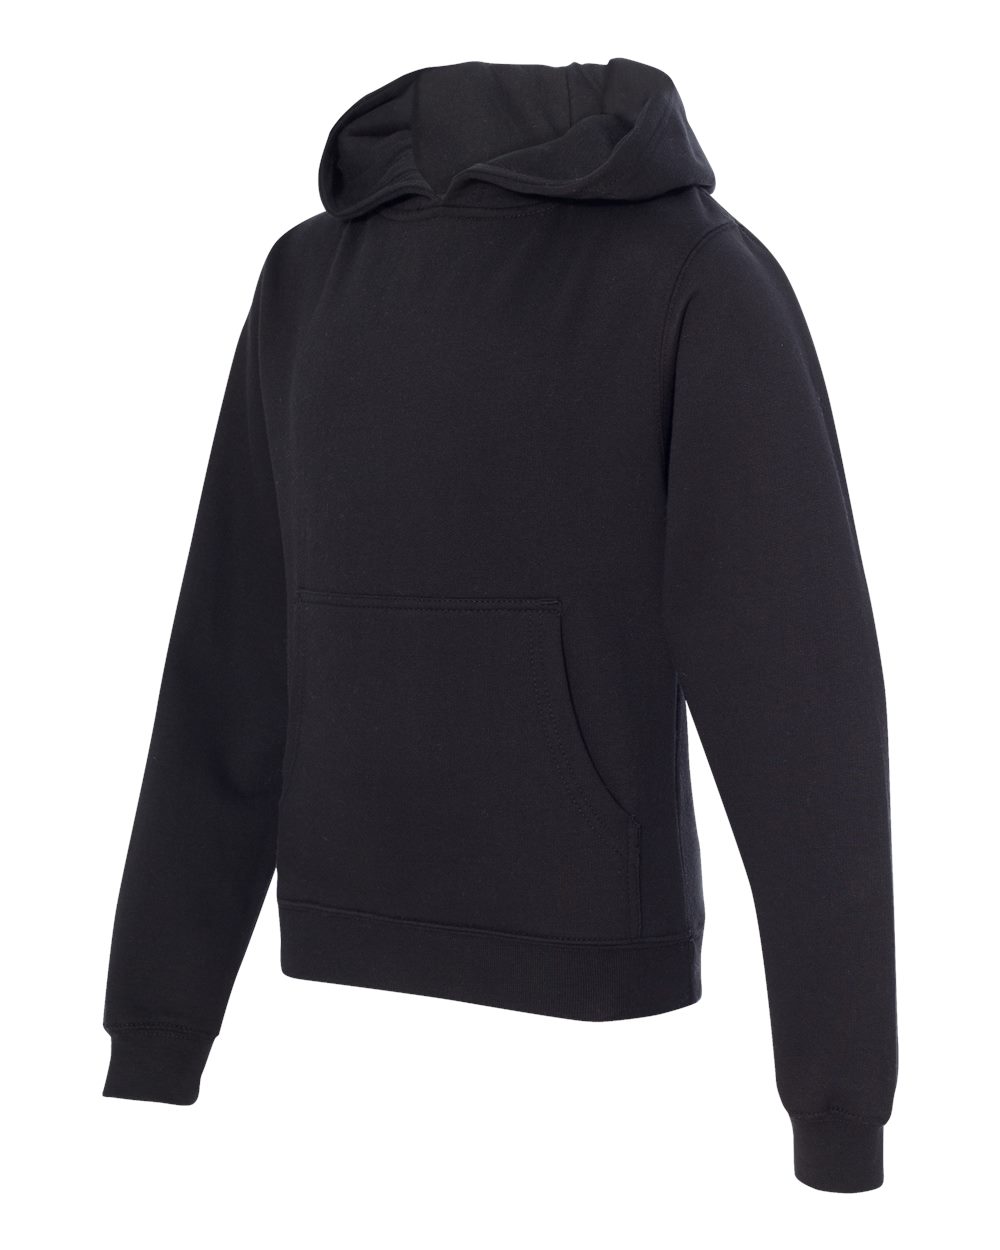 Independent Trading Co. SS4001Y - Youth Midweight Hooded Pullover Sweatshirt